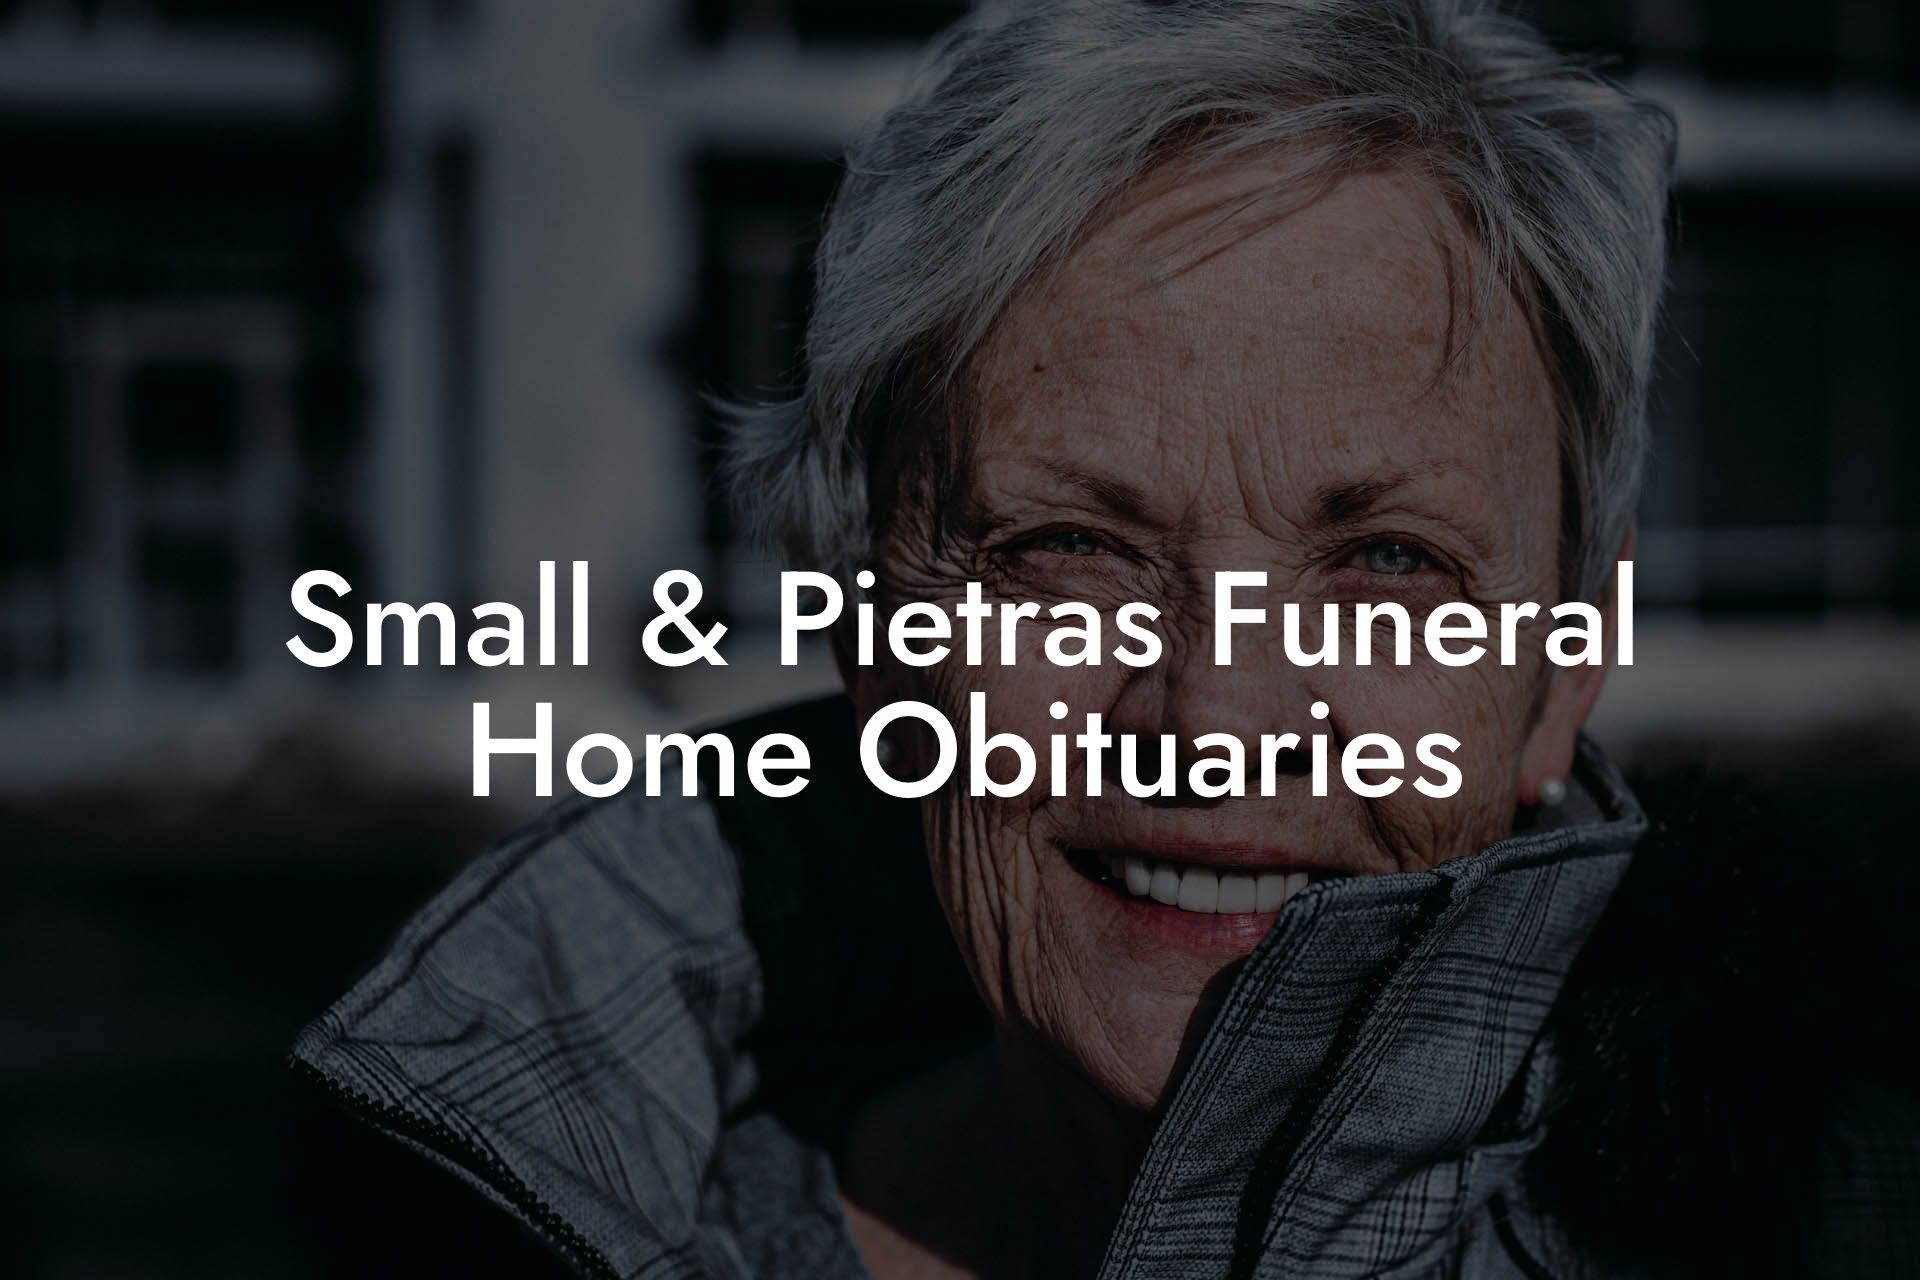 Small & Pietras Funeral Home Obituaries